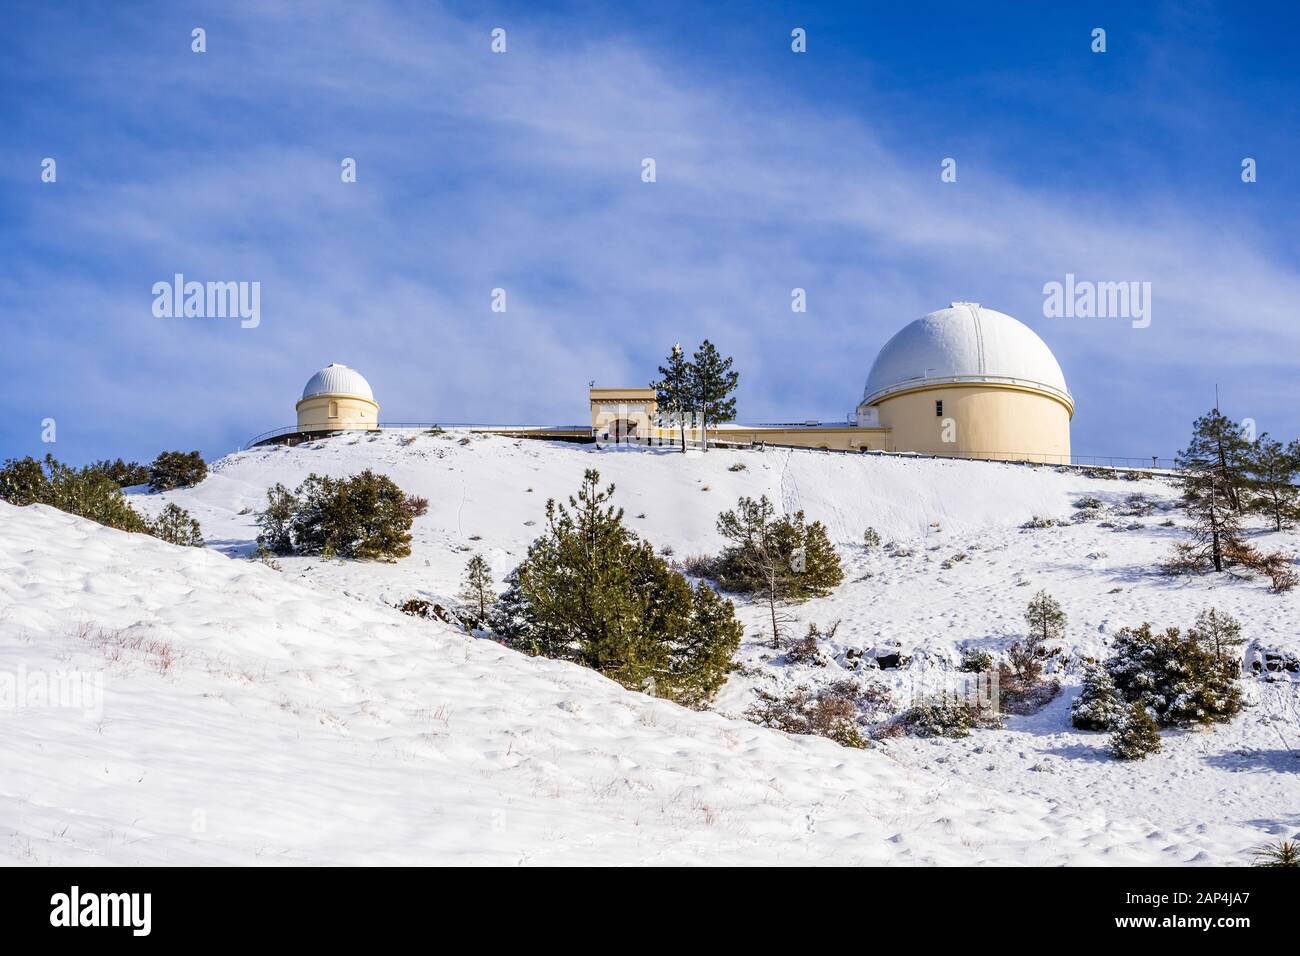 View towards the top of Mt Hamilton on a clear winter day, snow covering the ground; San Jose, San Francisco bay area, California Stock Photo